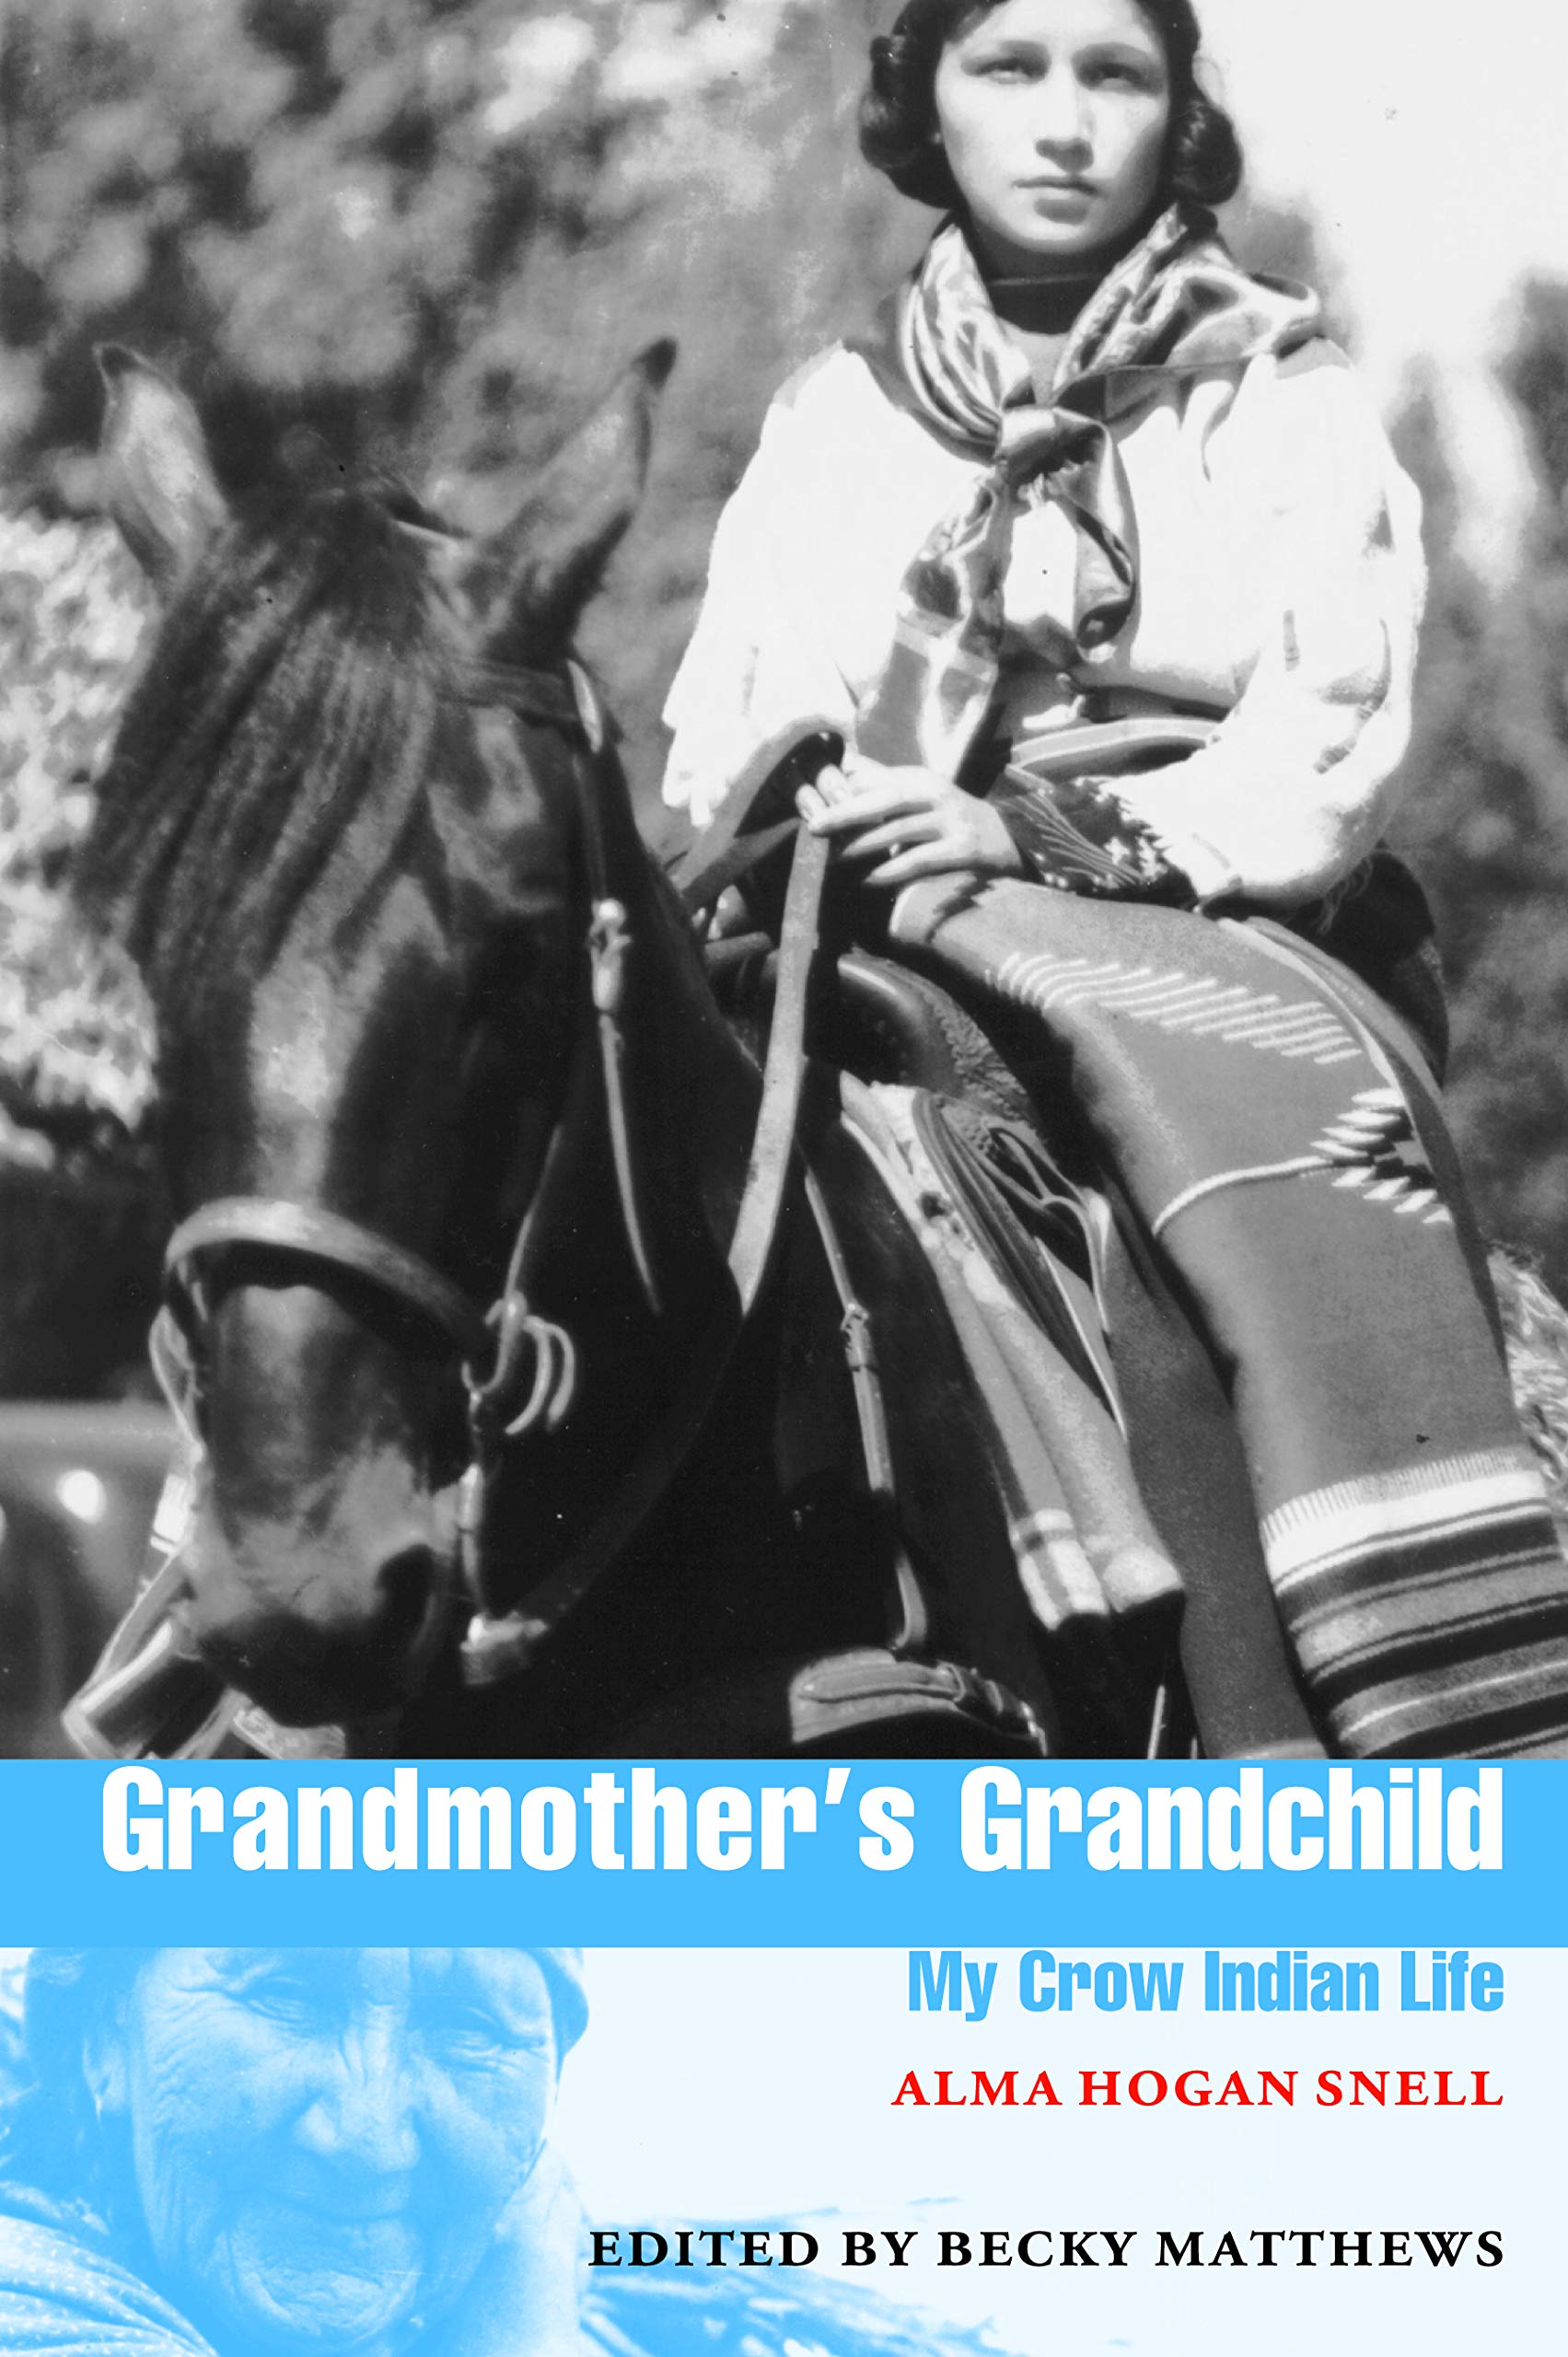 Book cover of "Grandmother's Grandchild : My Crow Indian Life"